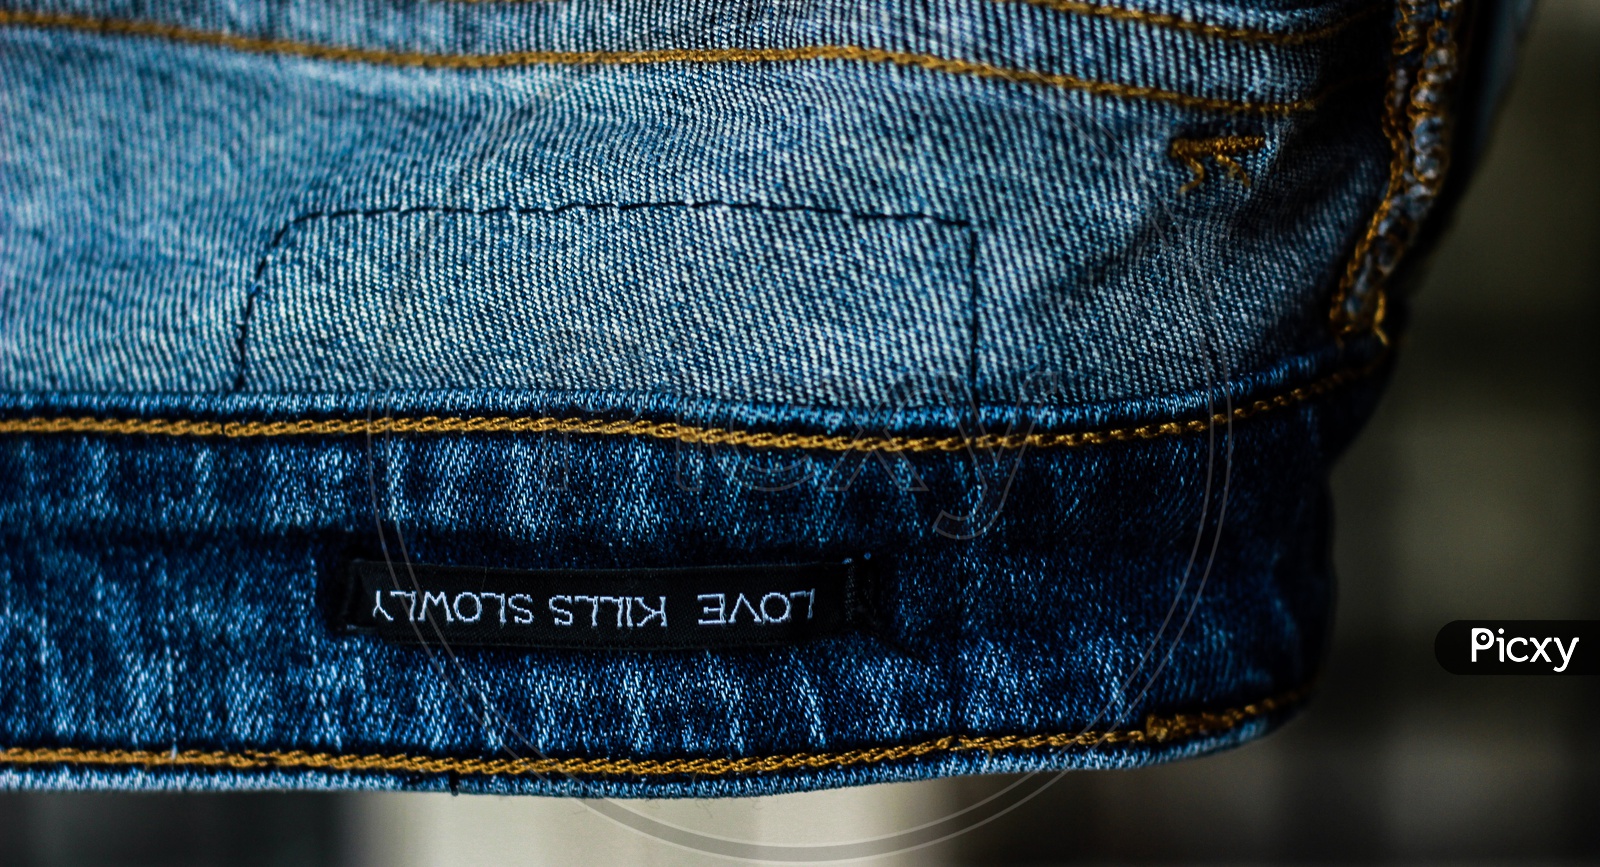 Quotes on Jeans